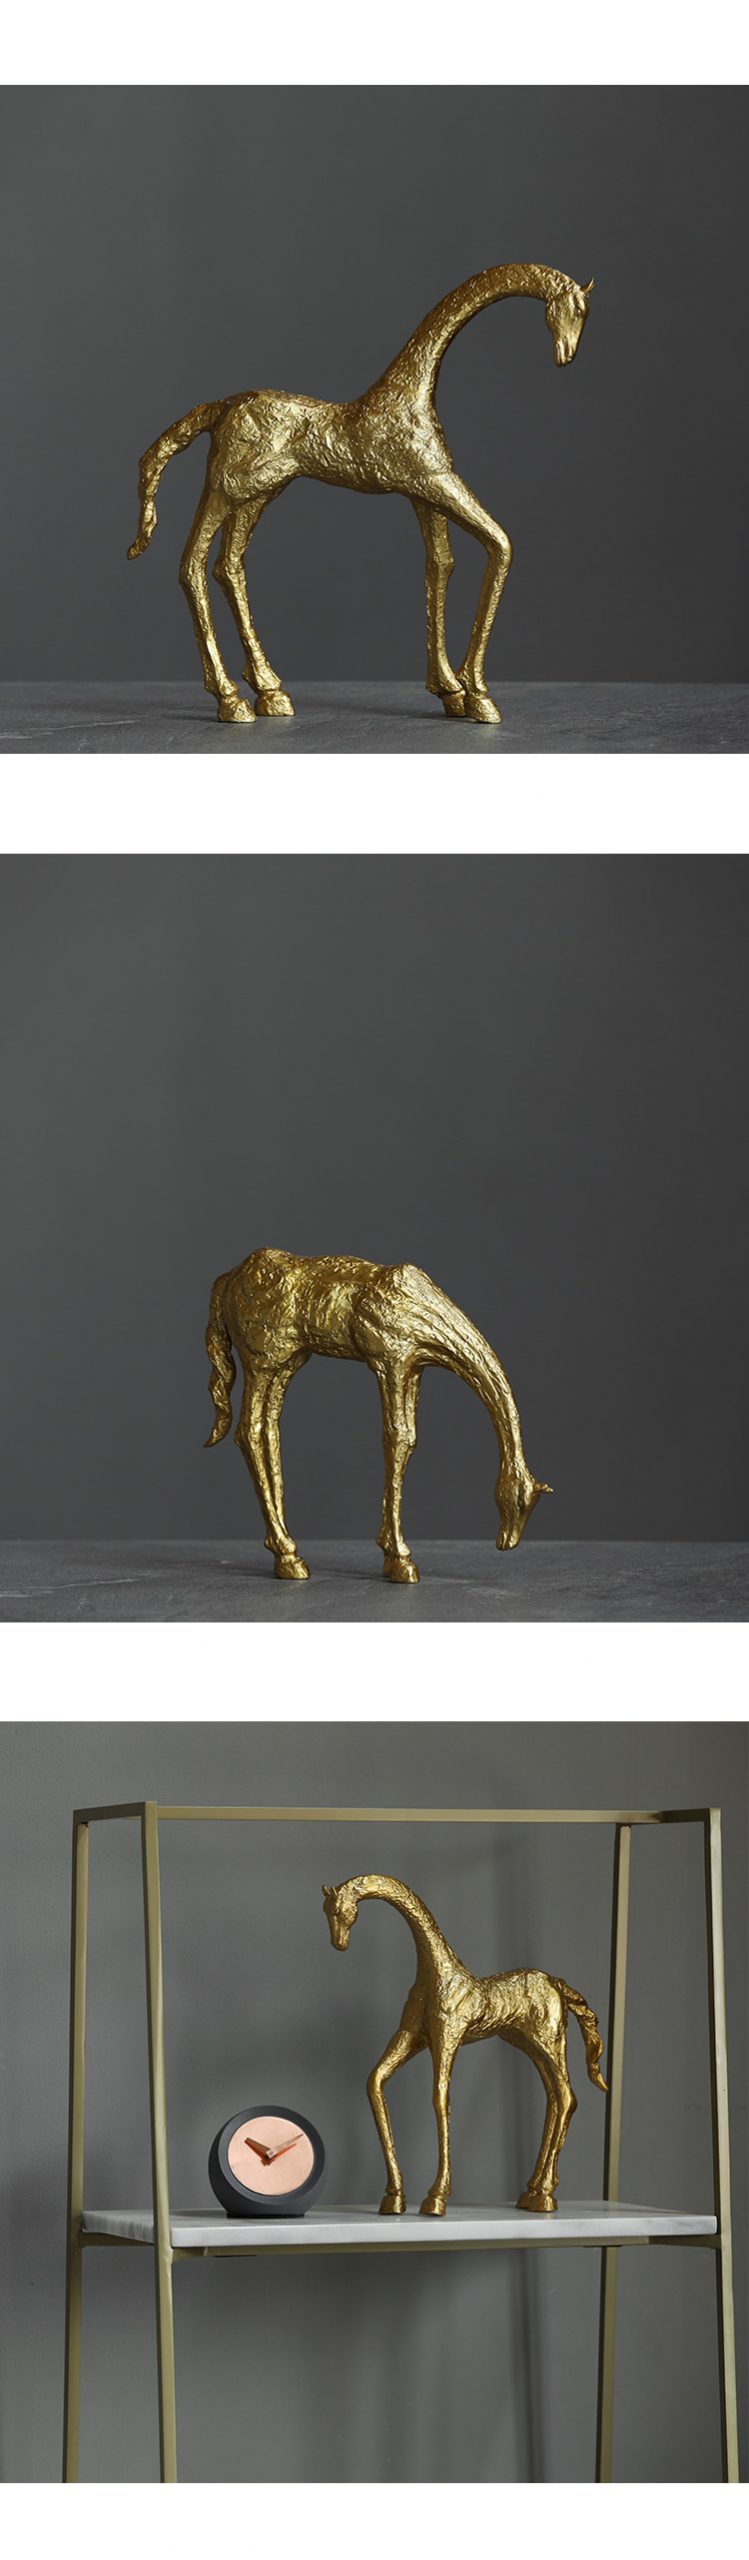 Home Decoration Accessories Art Animal Cast Iron Golden Bowed Horse Statue Decor Figurine Living Room Ornament Gift Furnishings